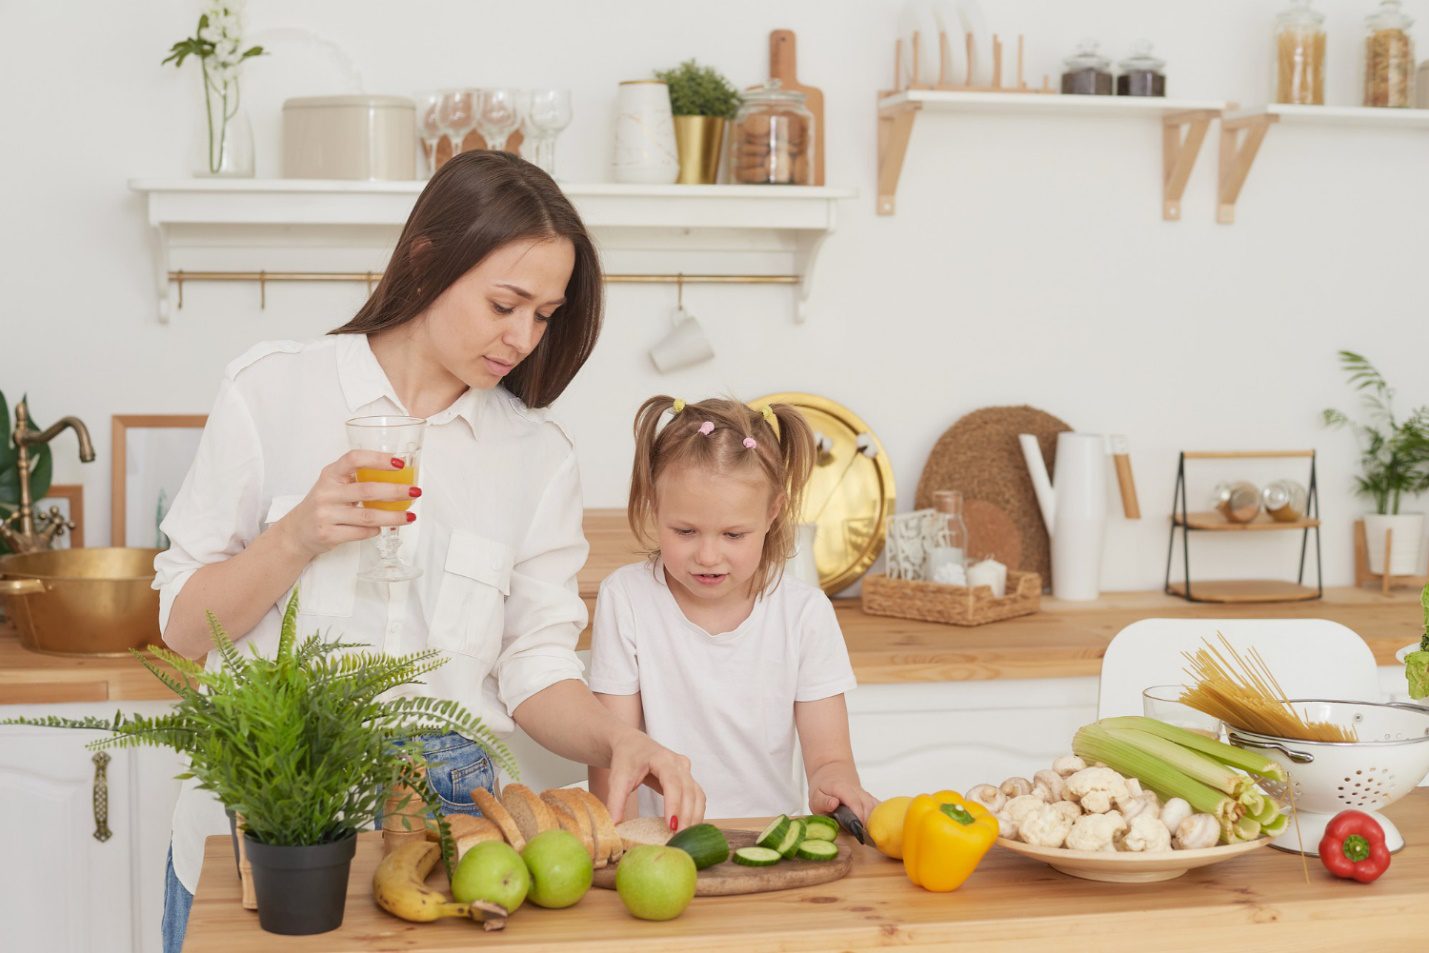 C:\Users\Dell\Downloads\mom-daughter-prepare-salad-kitchen-happy-loving-family-are-preparing-together-concept-healthy-diet-lifestyle-family-value.jpg